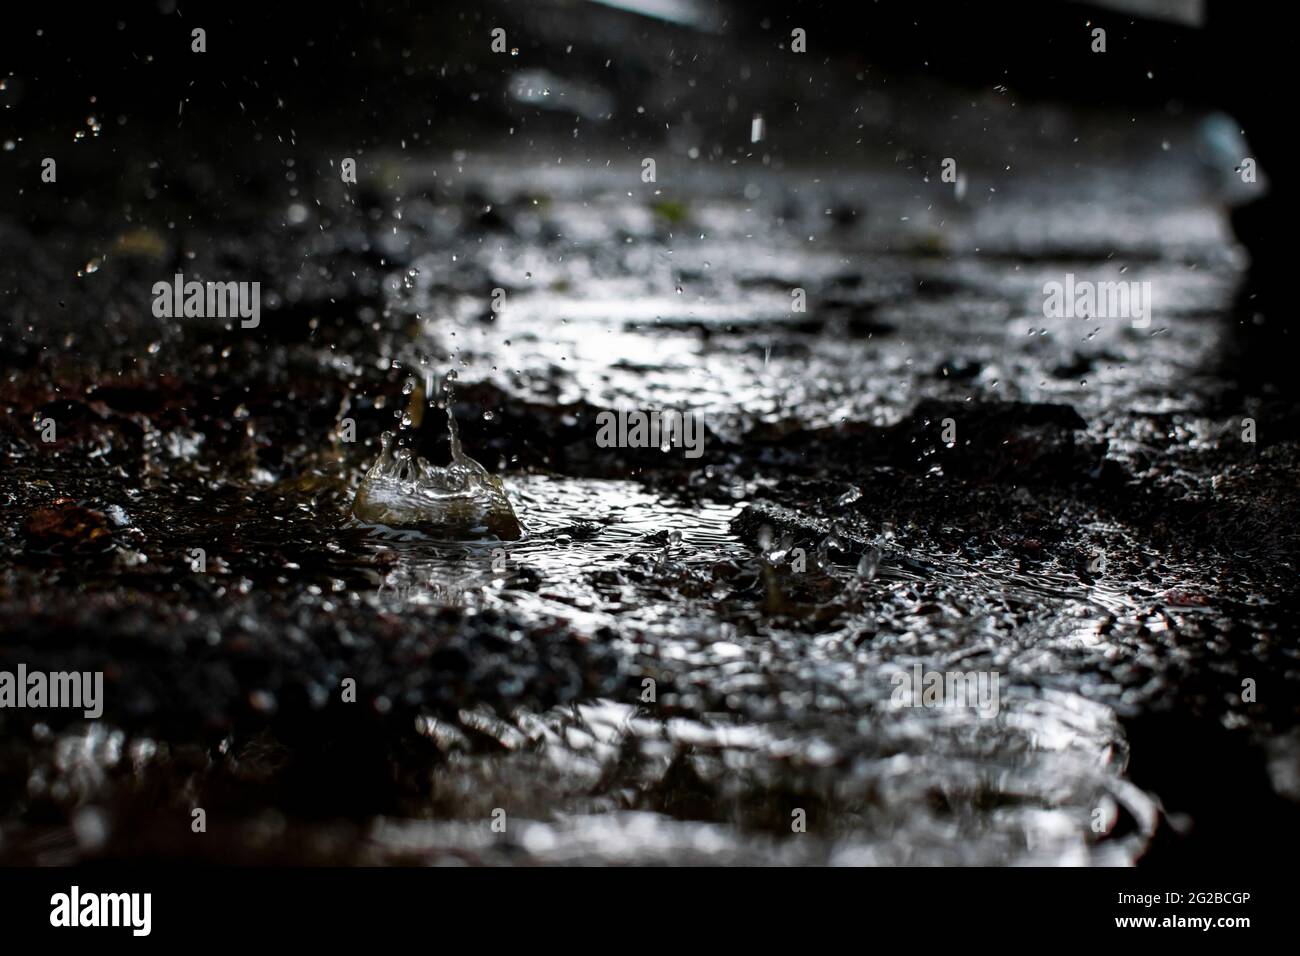 Monsoon rain water with raindrops dropping in the water during evening. Used selective focus. Stock Photo